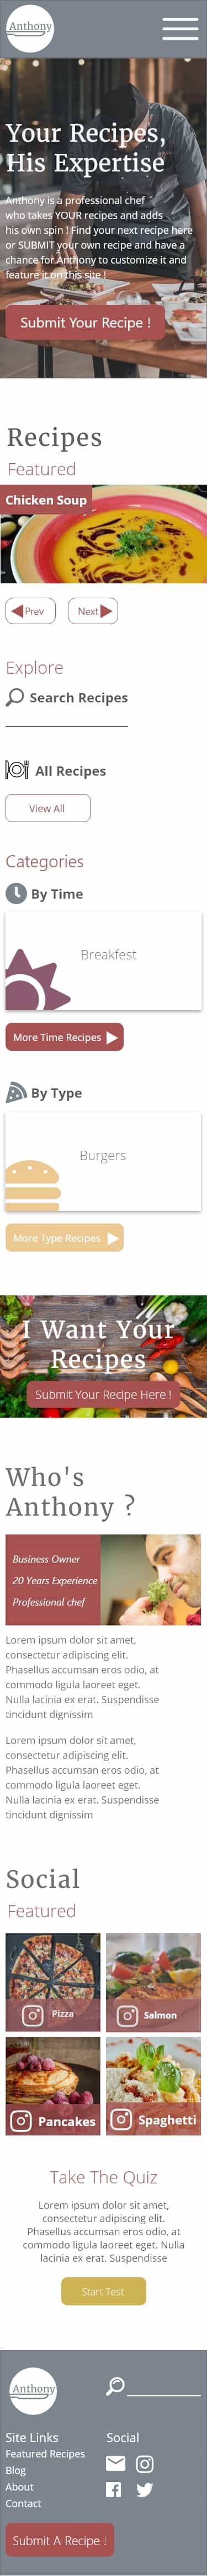 Mobile homepage design of a chef website, most content sections are displayed vertically. Title says 'your recipes, his expertise'. Designs contains yellow, red, gray and white color. Text is included and styled. Images of a chef, pizza and food are included in designs